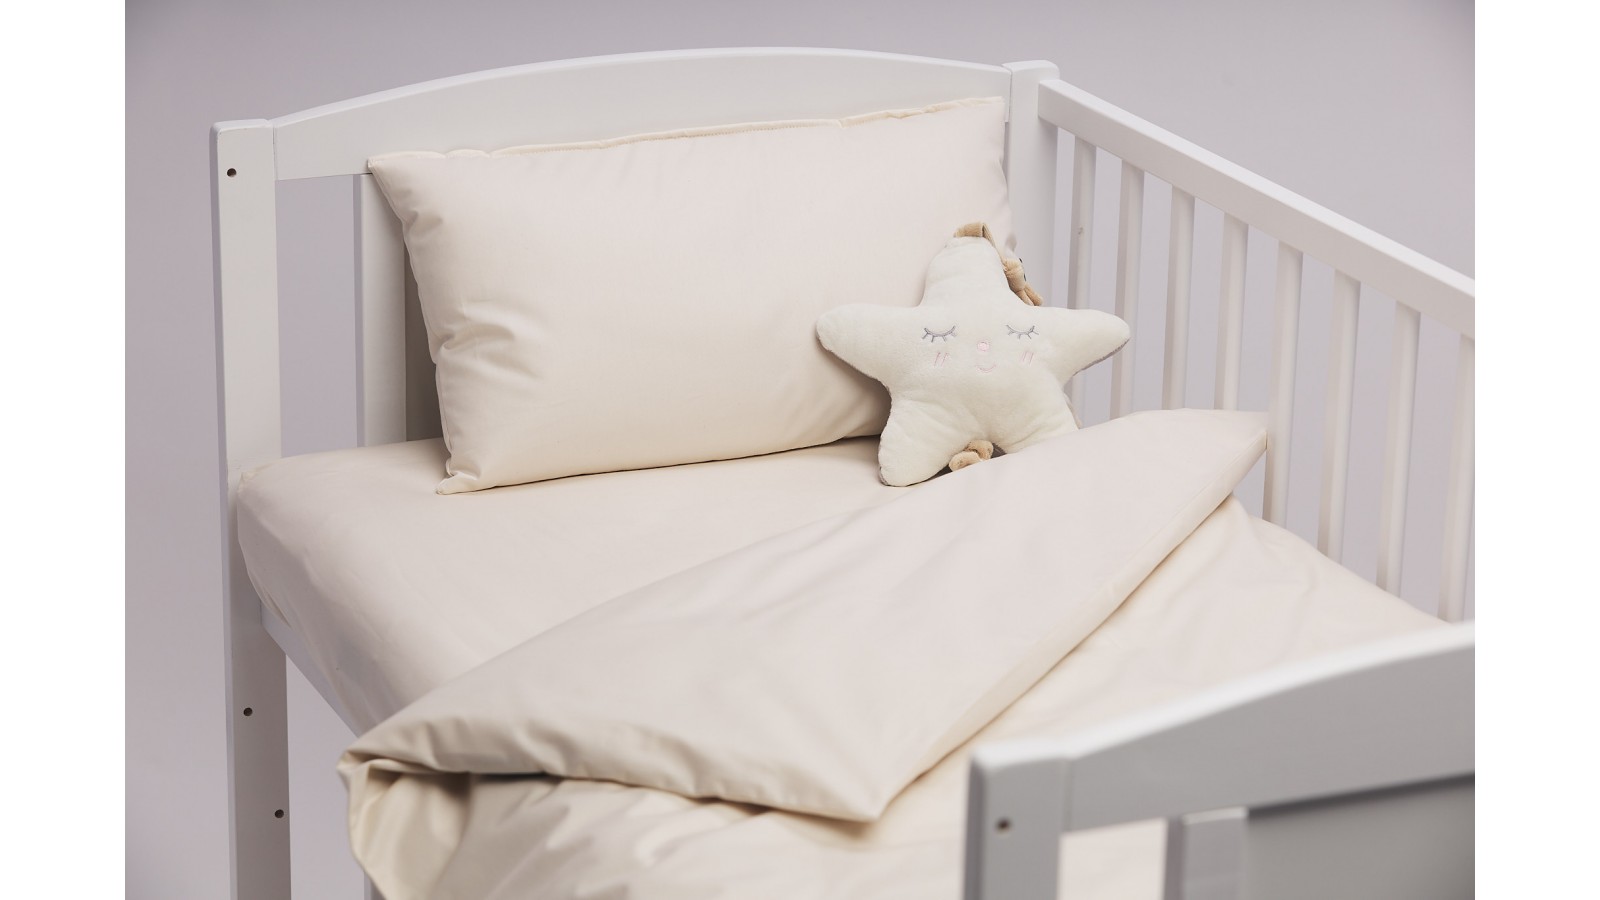 How to choose a bed which is safe and healthy for children? - Valeria Home